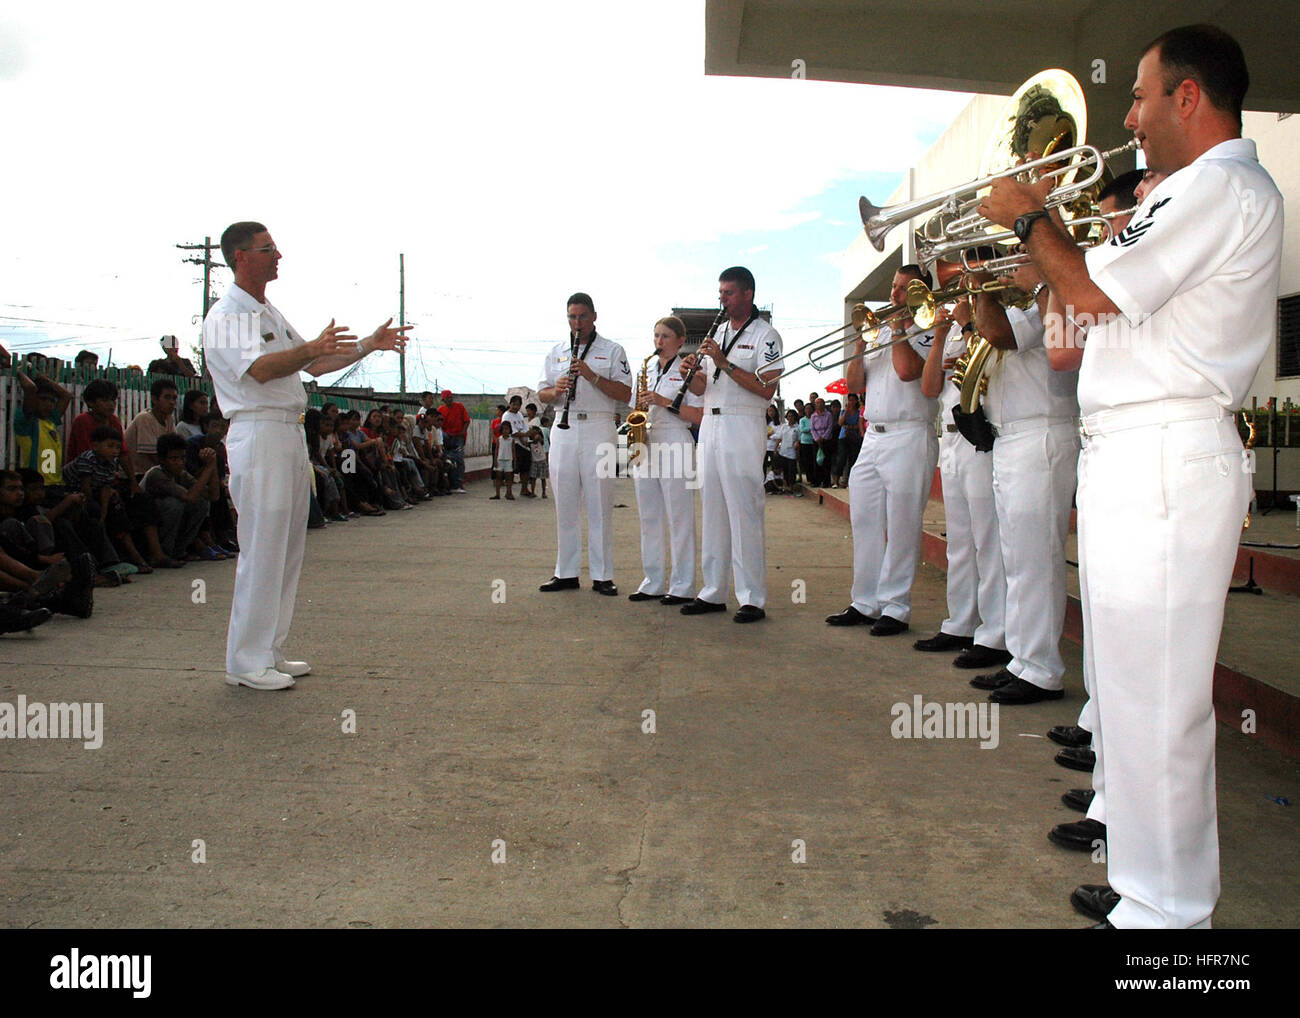 60612-N-3931M-049 Tawi Tawi, Philippines (June 12, 2006) - U.S. Navy Showband Sailors embarked aboard the U.S. Military Sealift Command (MSC) Hospital Ship USNS Mercy (T-AH 19), perform for local residents at the Datu Halun Sakilan Memorial Hospital, while the ship visits the city on a scheduled humanitarian mission. The Mercy has already visited Zamboanga and Jolo, Philippines, where its crew had treated several thousand patients. The ship will bring patients aboard where its doctors will perform major surgeries to remove goiters and cataracts as well as repair cleft lips. Ashore, teams of do Stock Photo